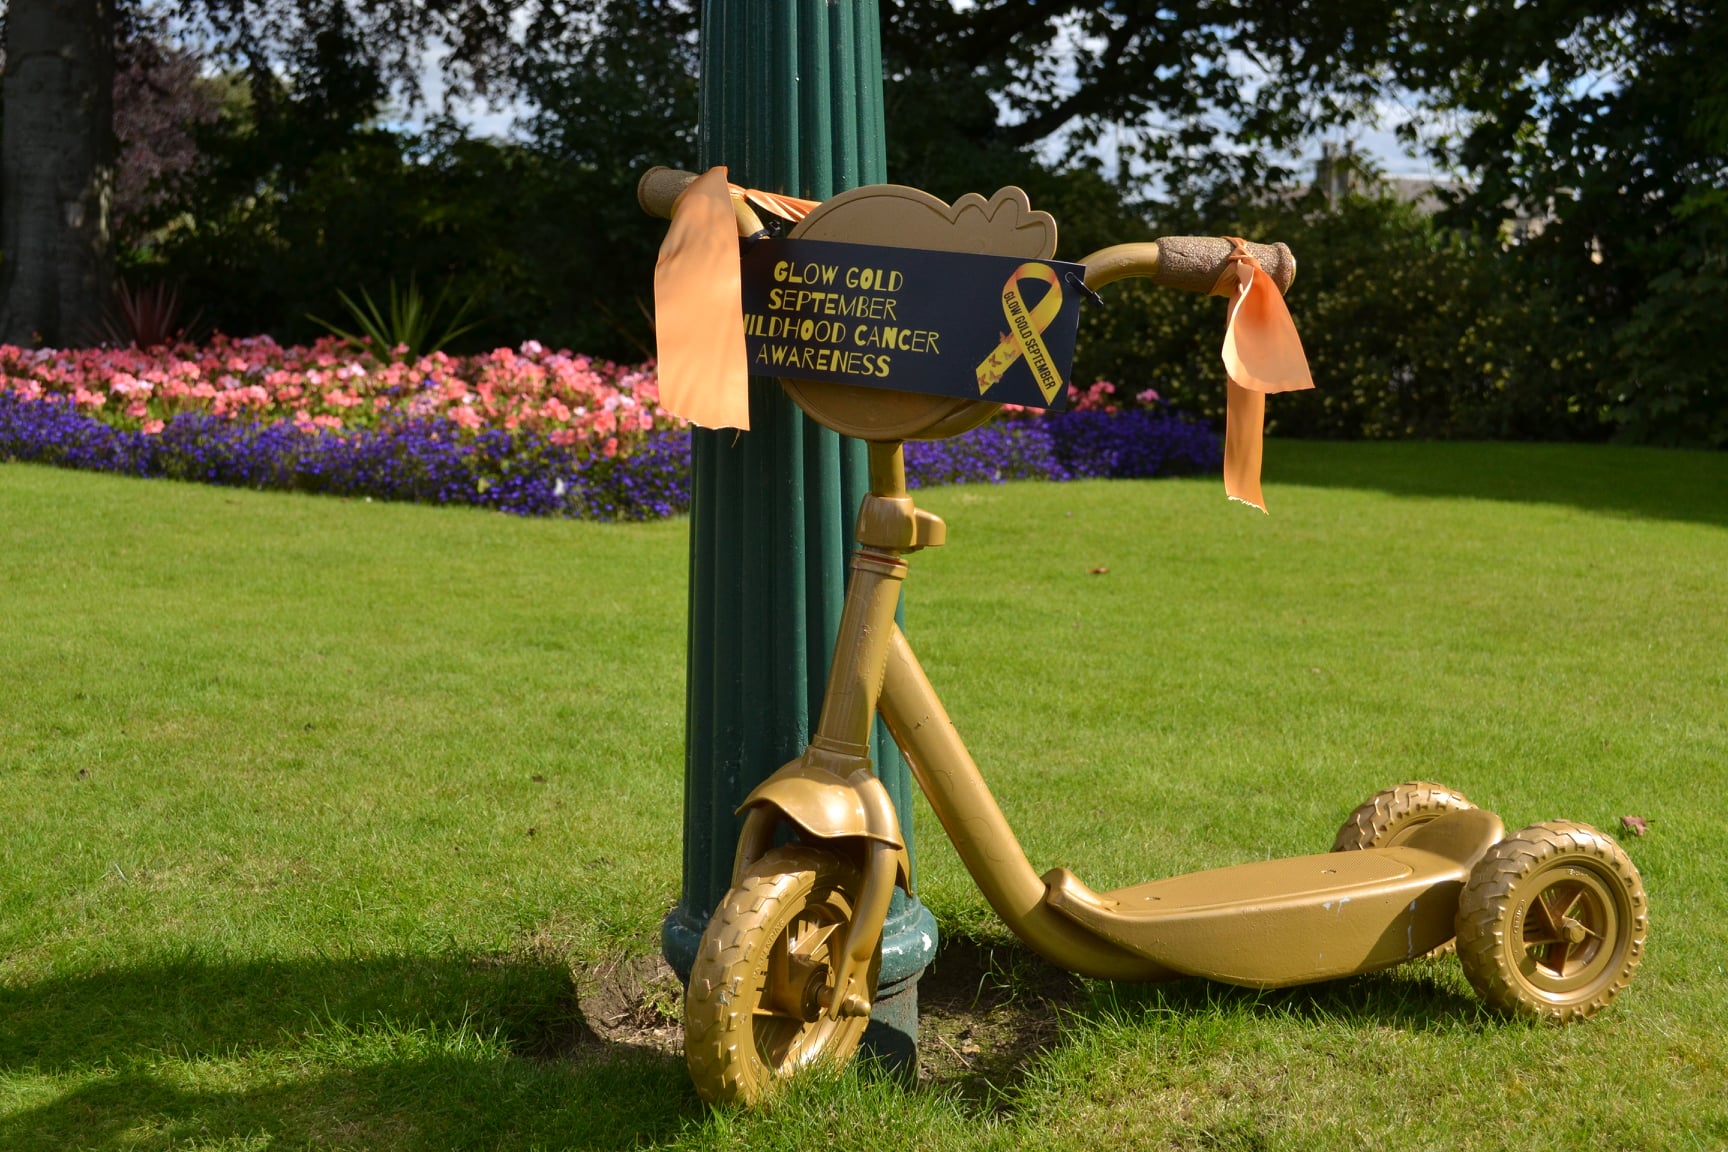 A golden scooter was first to be stolen from Beveridge Park.